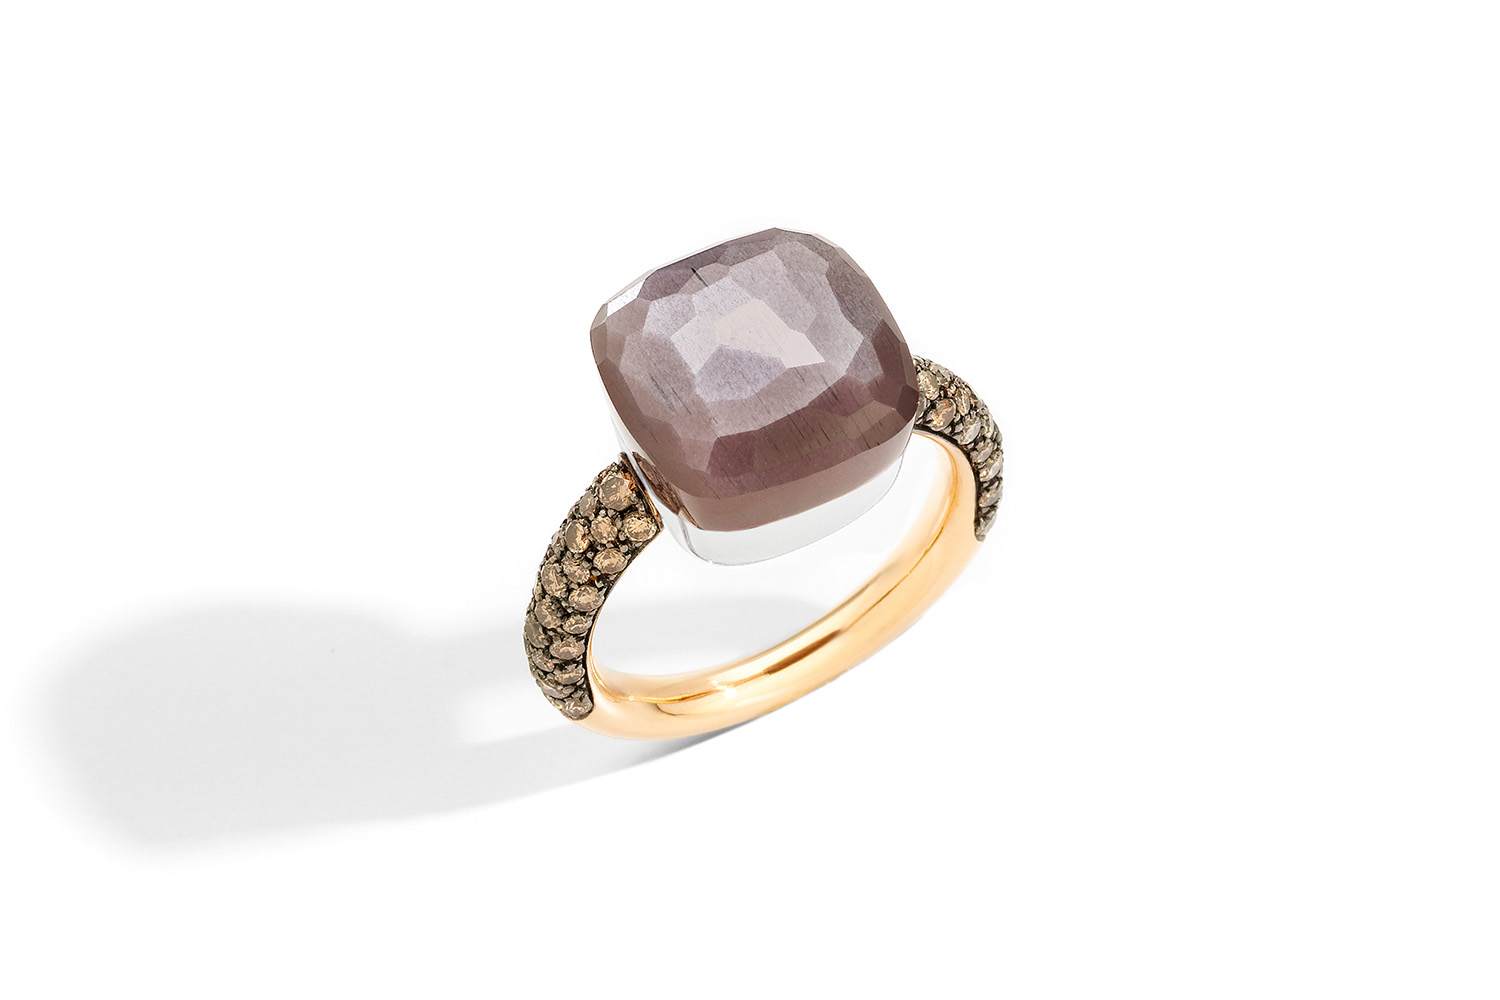 NUDO-CHOCOLATE-maxi-ring-in-rose-gold-with-dark-brown-moonstone-and-brown-diamonds-by-Pomellato-–-kopia